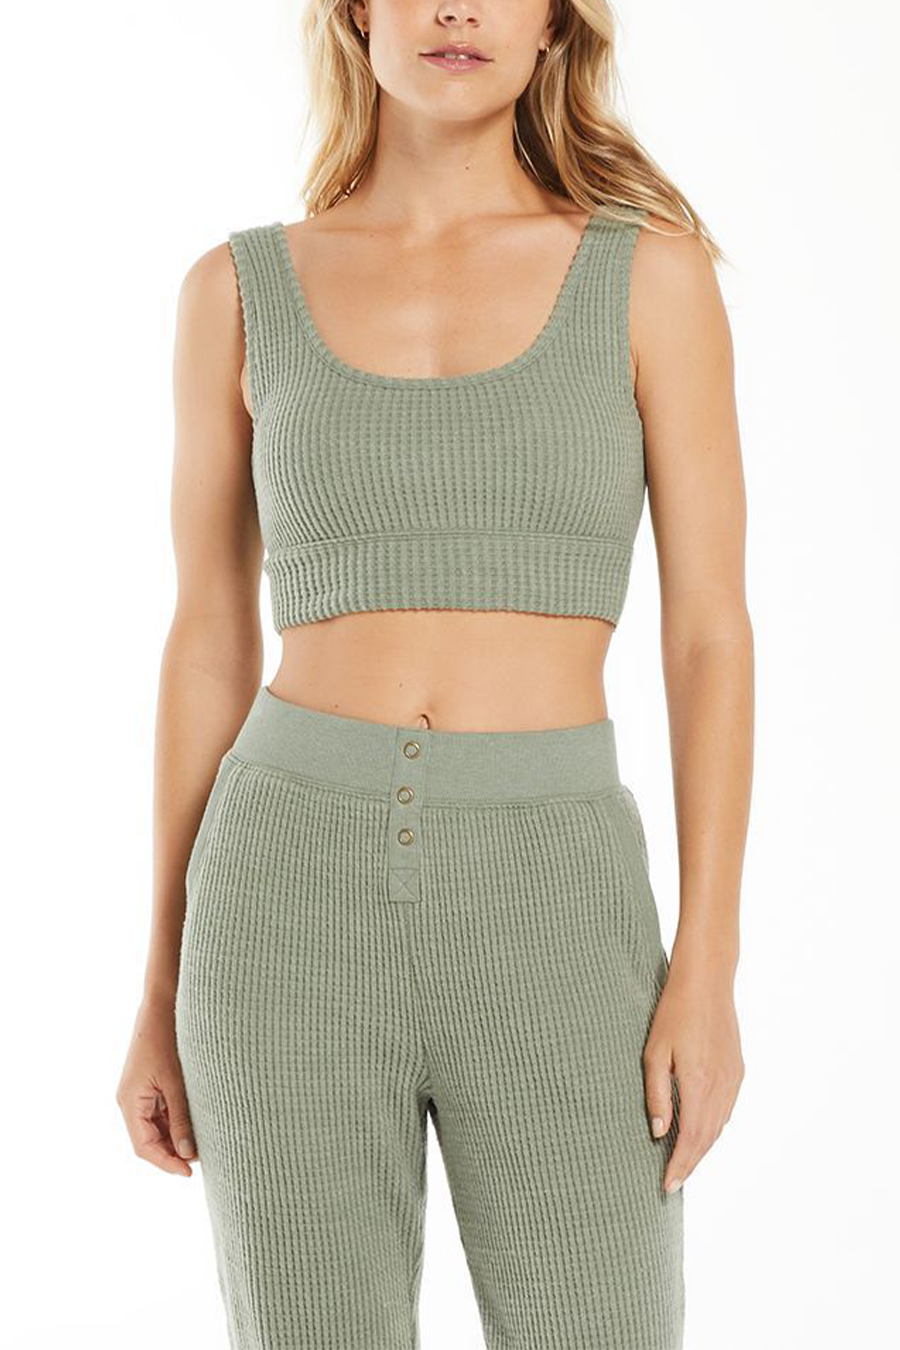 Zoe Waffle Tank Bra | Agave Green - Main Image Number 1 of 1